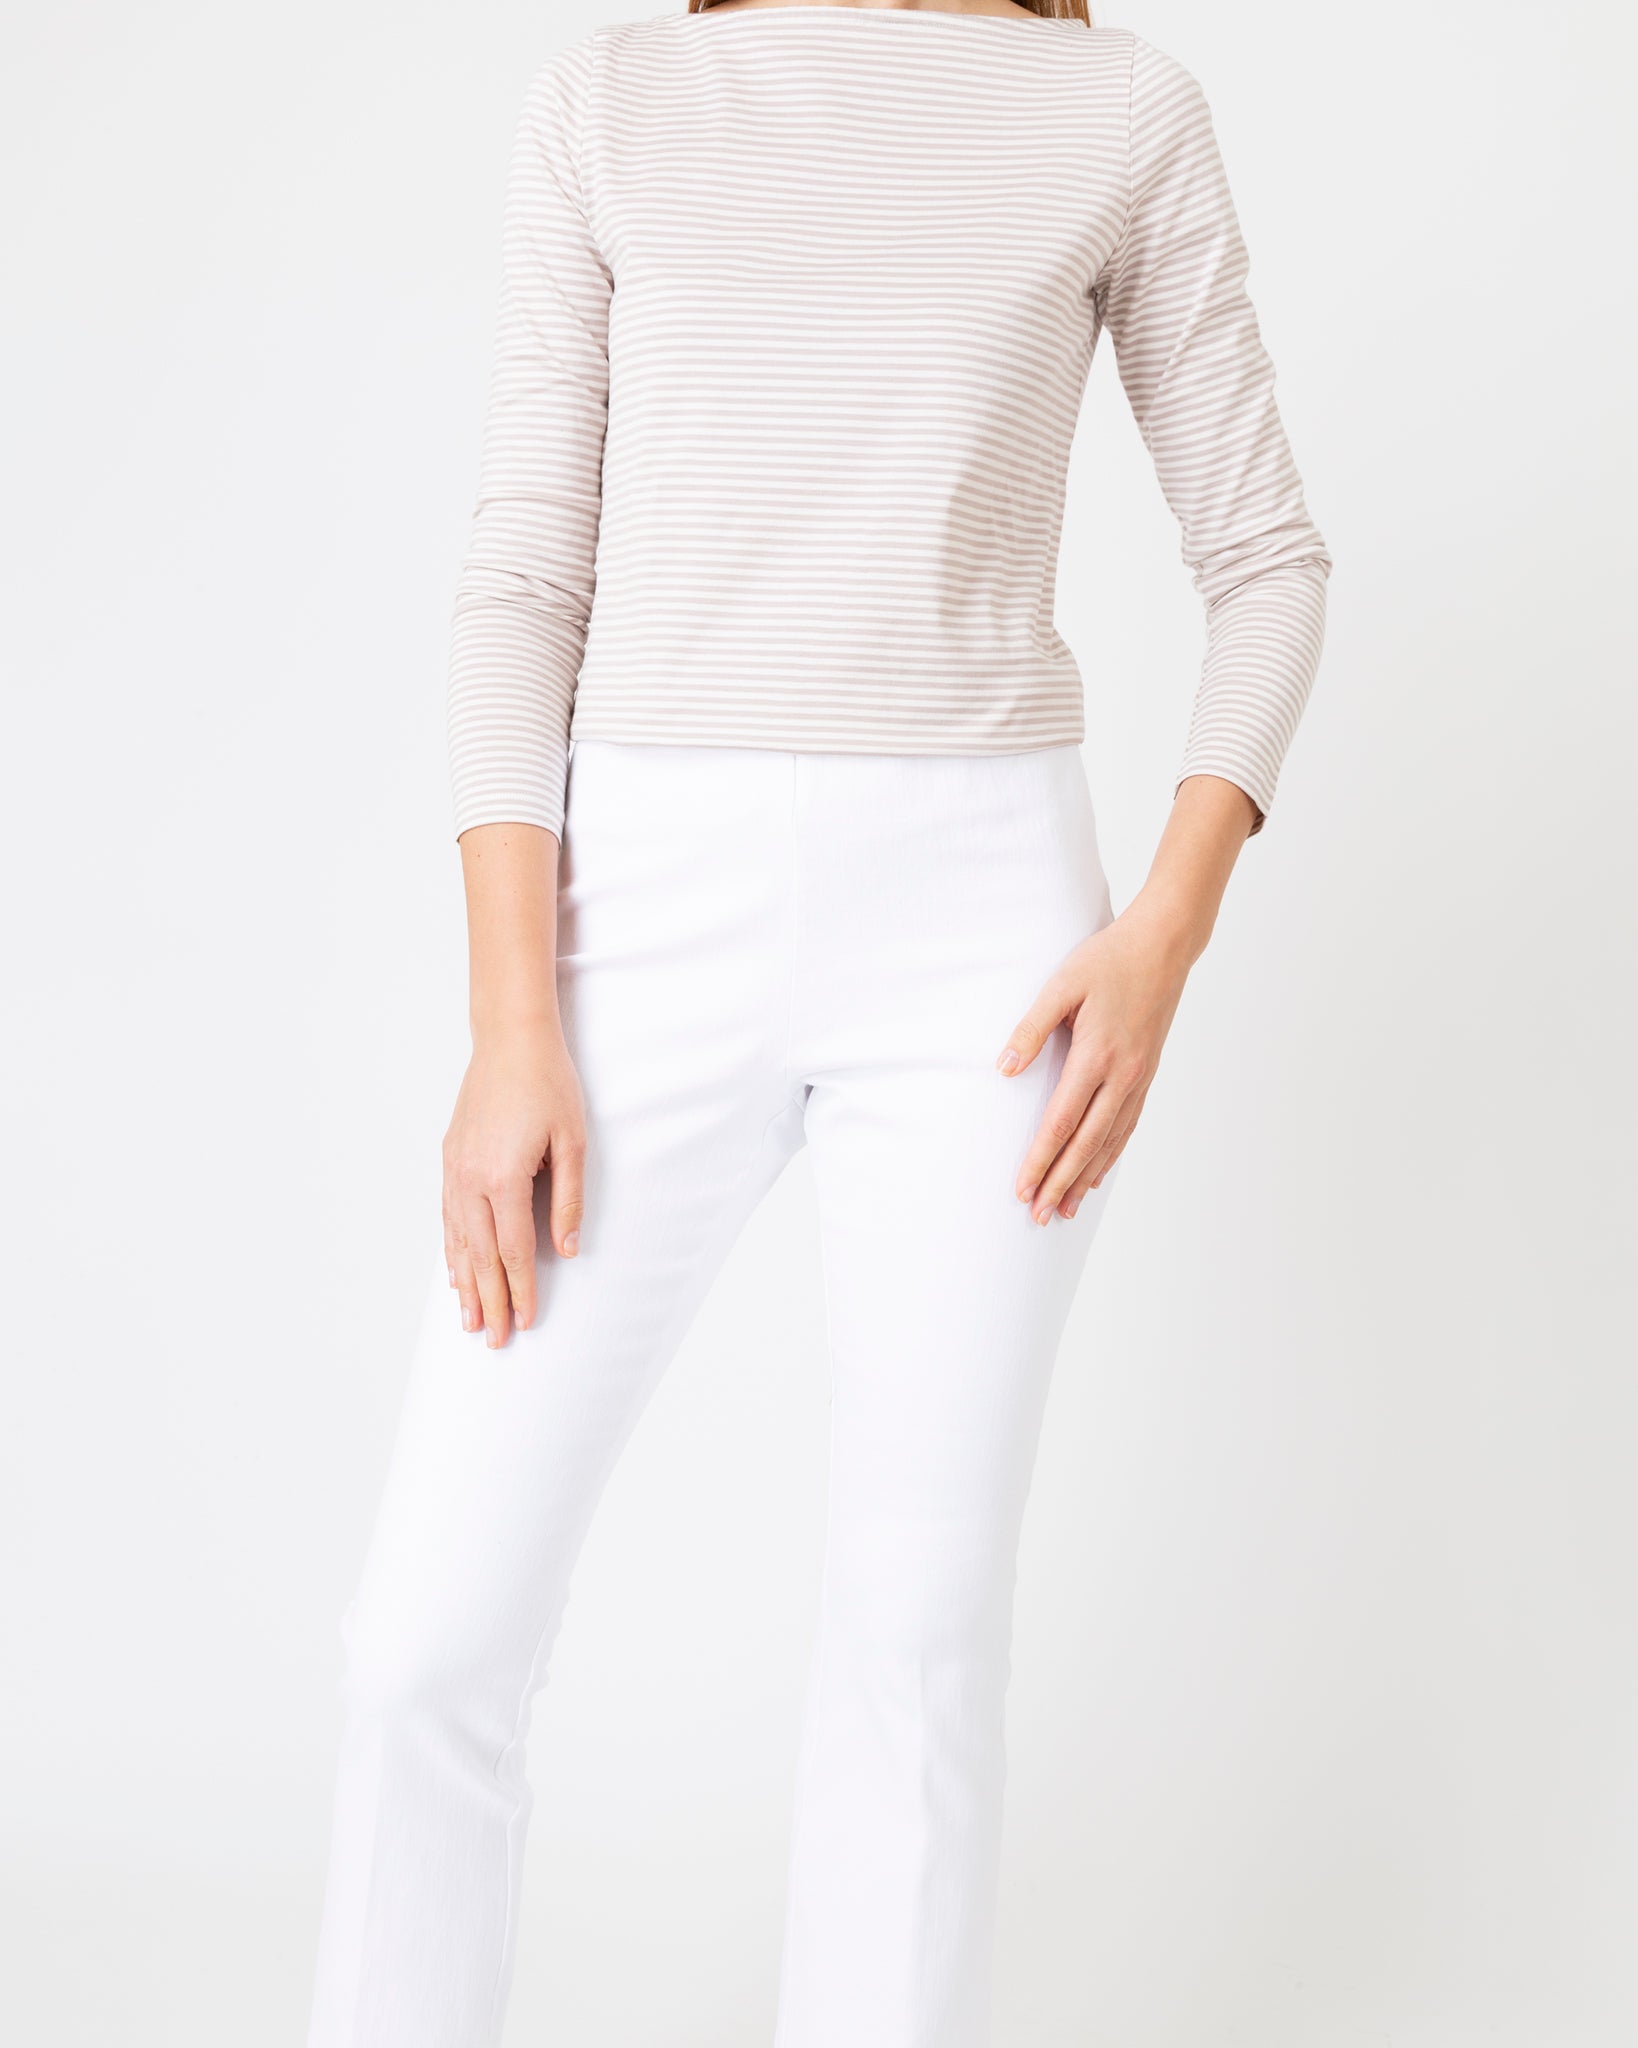 Faye Flare Cropped Pant in White Garment-Dyed Stretch Twill